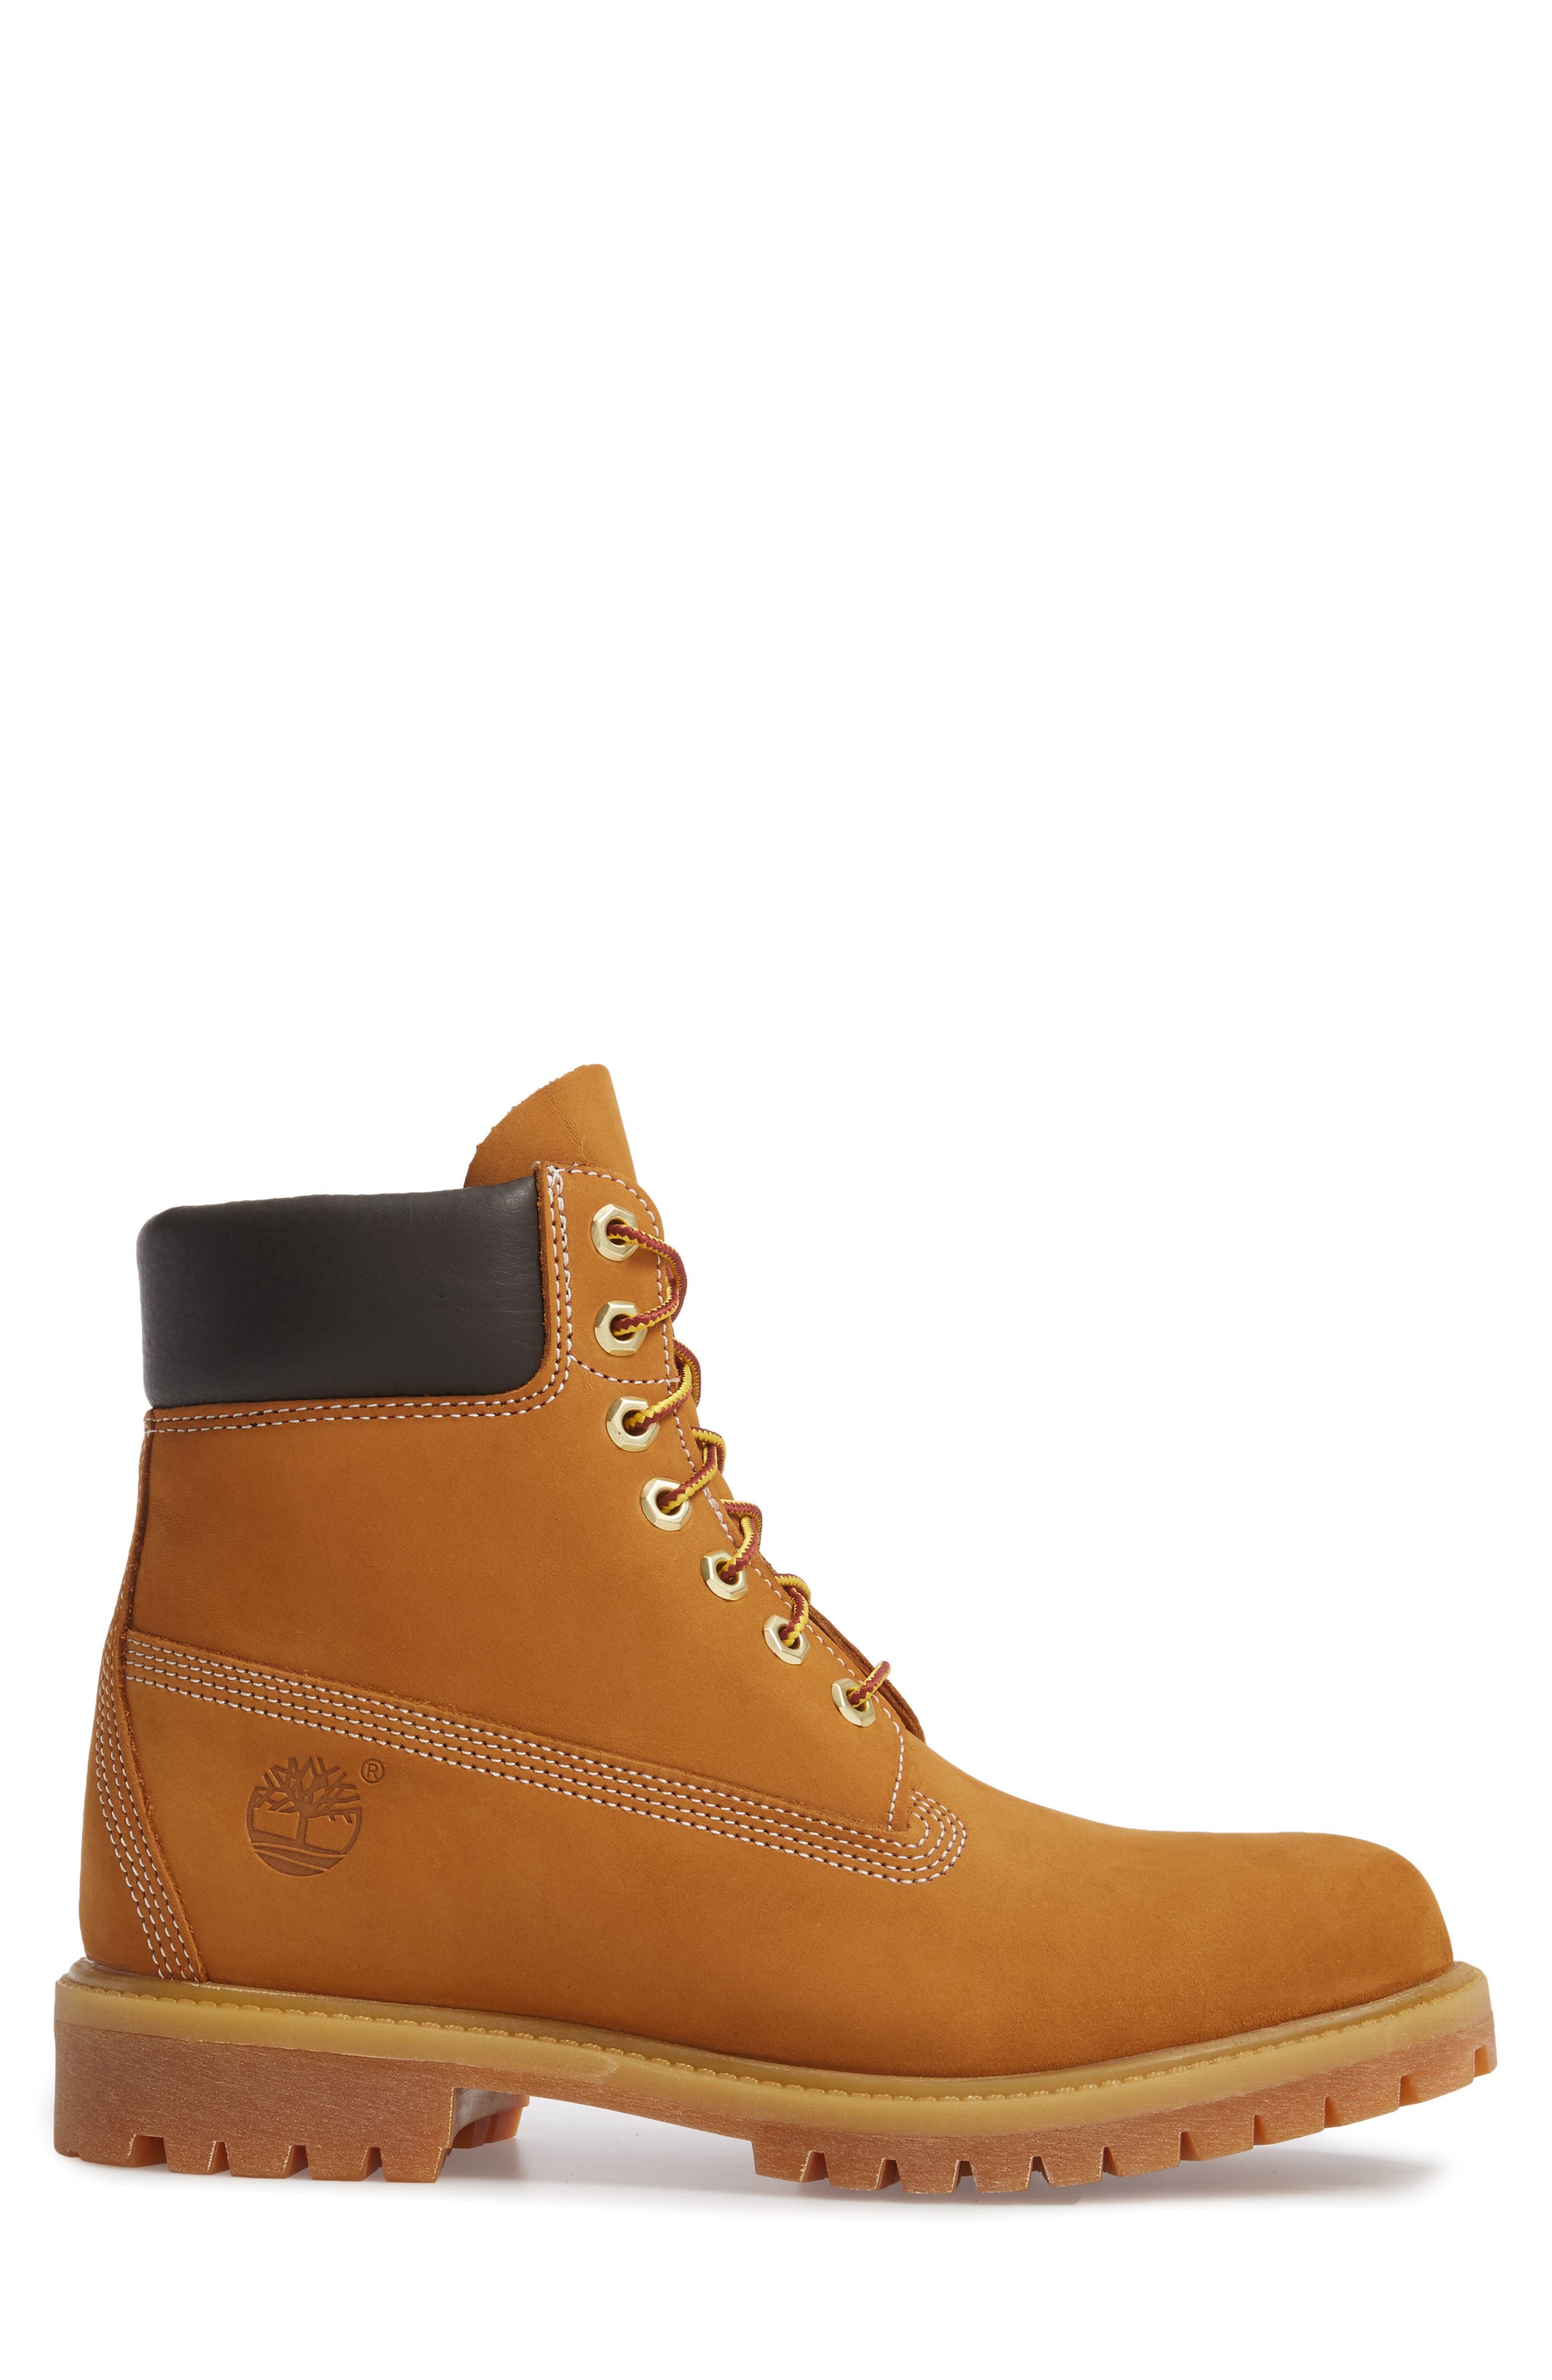 TIMBERLAND Women'S Nellie Lace Up Utility Waterproof Boots Women'S ...